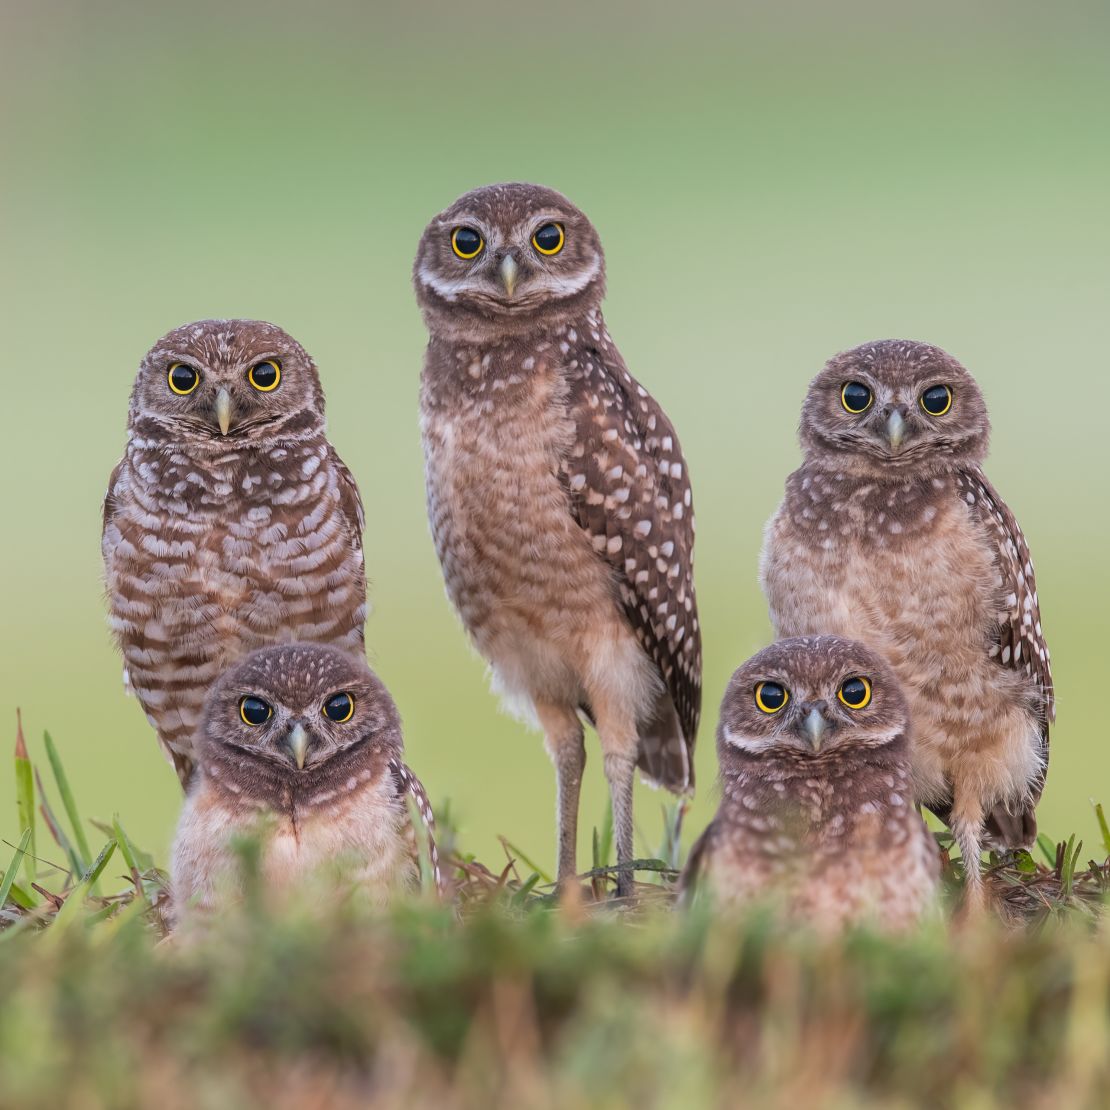 A family portrait of burrowing owls in Florida. Open grasslands are shrinking where the tiny burrowing owl makes its home nesting in underground burrows.